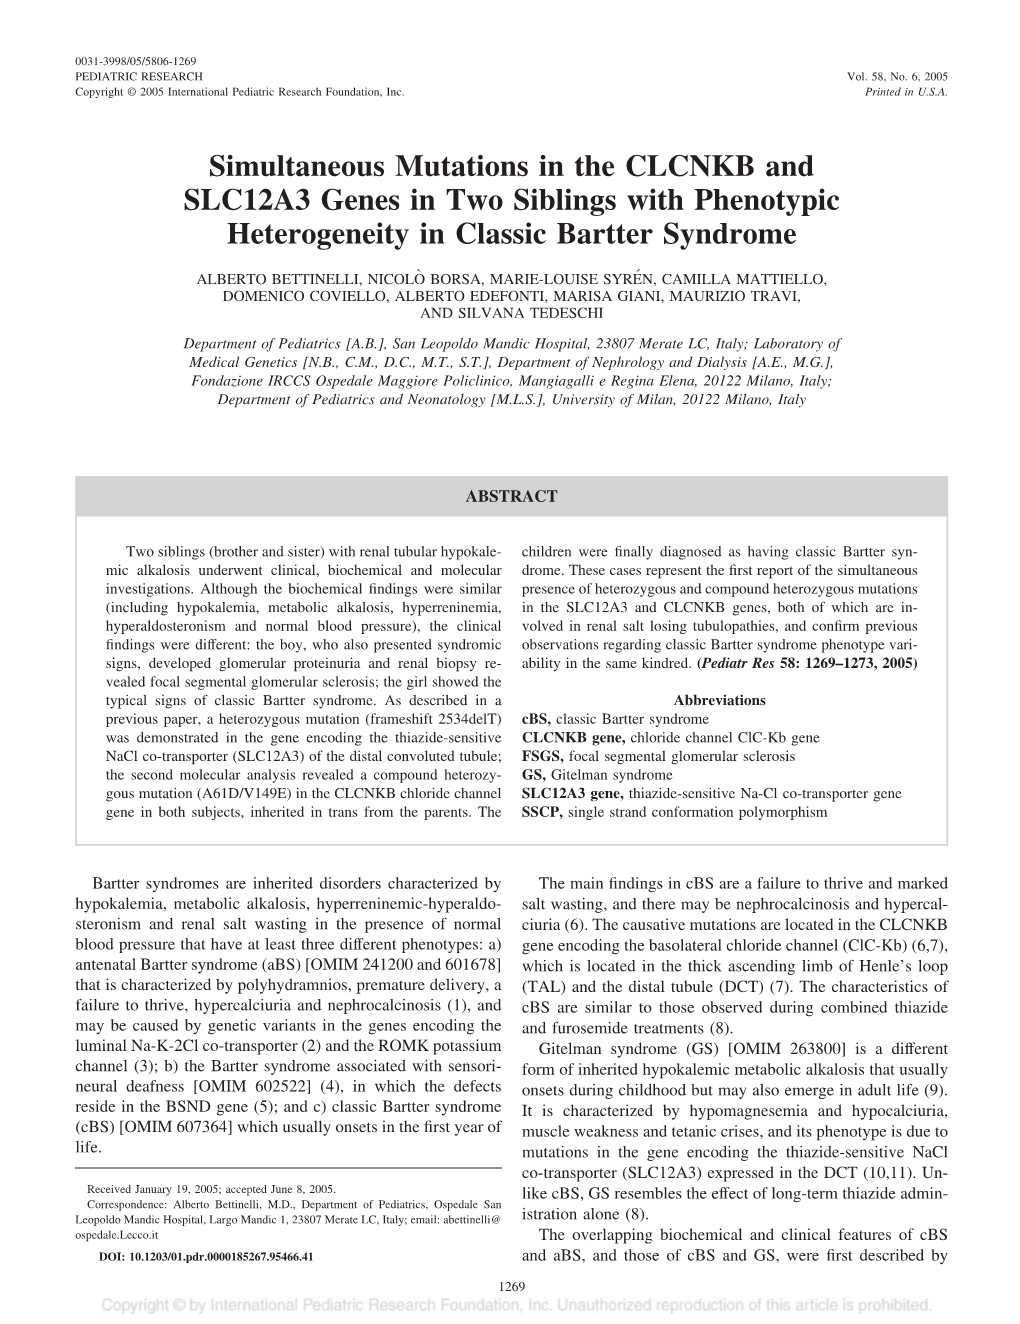 Simultaneous Mutations in the CLCNKB and SLC12A3 Genes in Two Siblings with Phenotypic Heterogeneity in Classic Bartter Syndrome